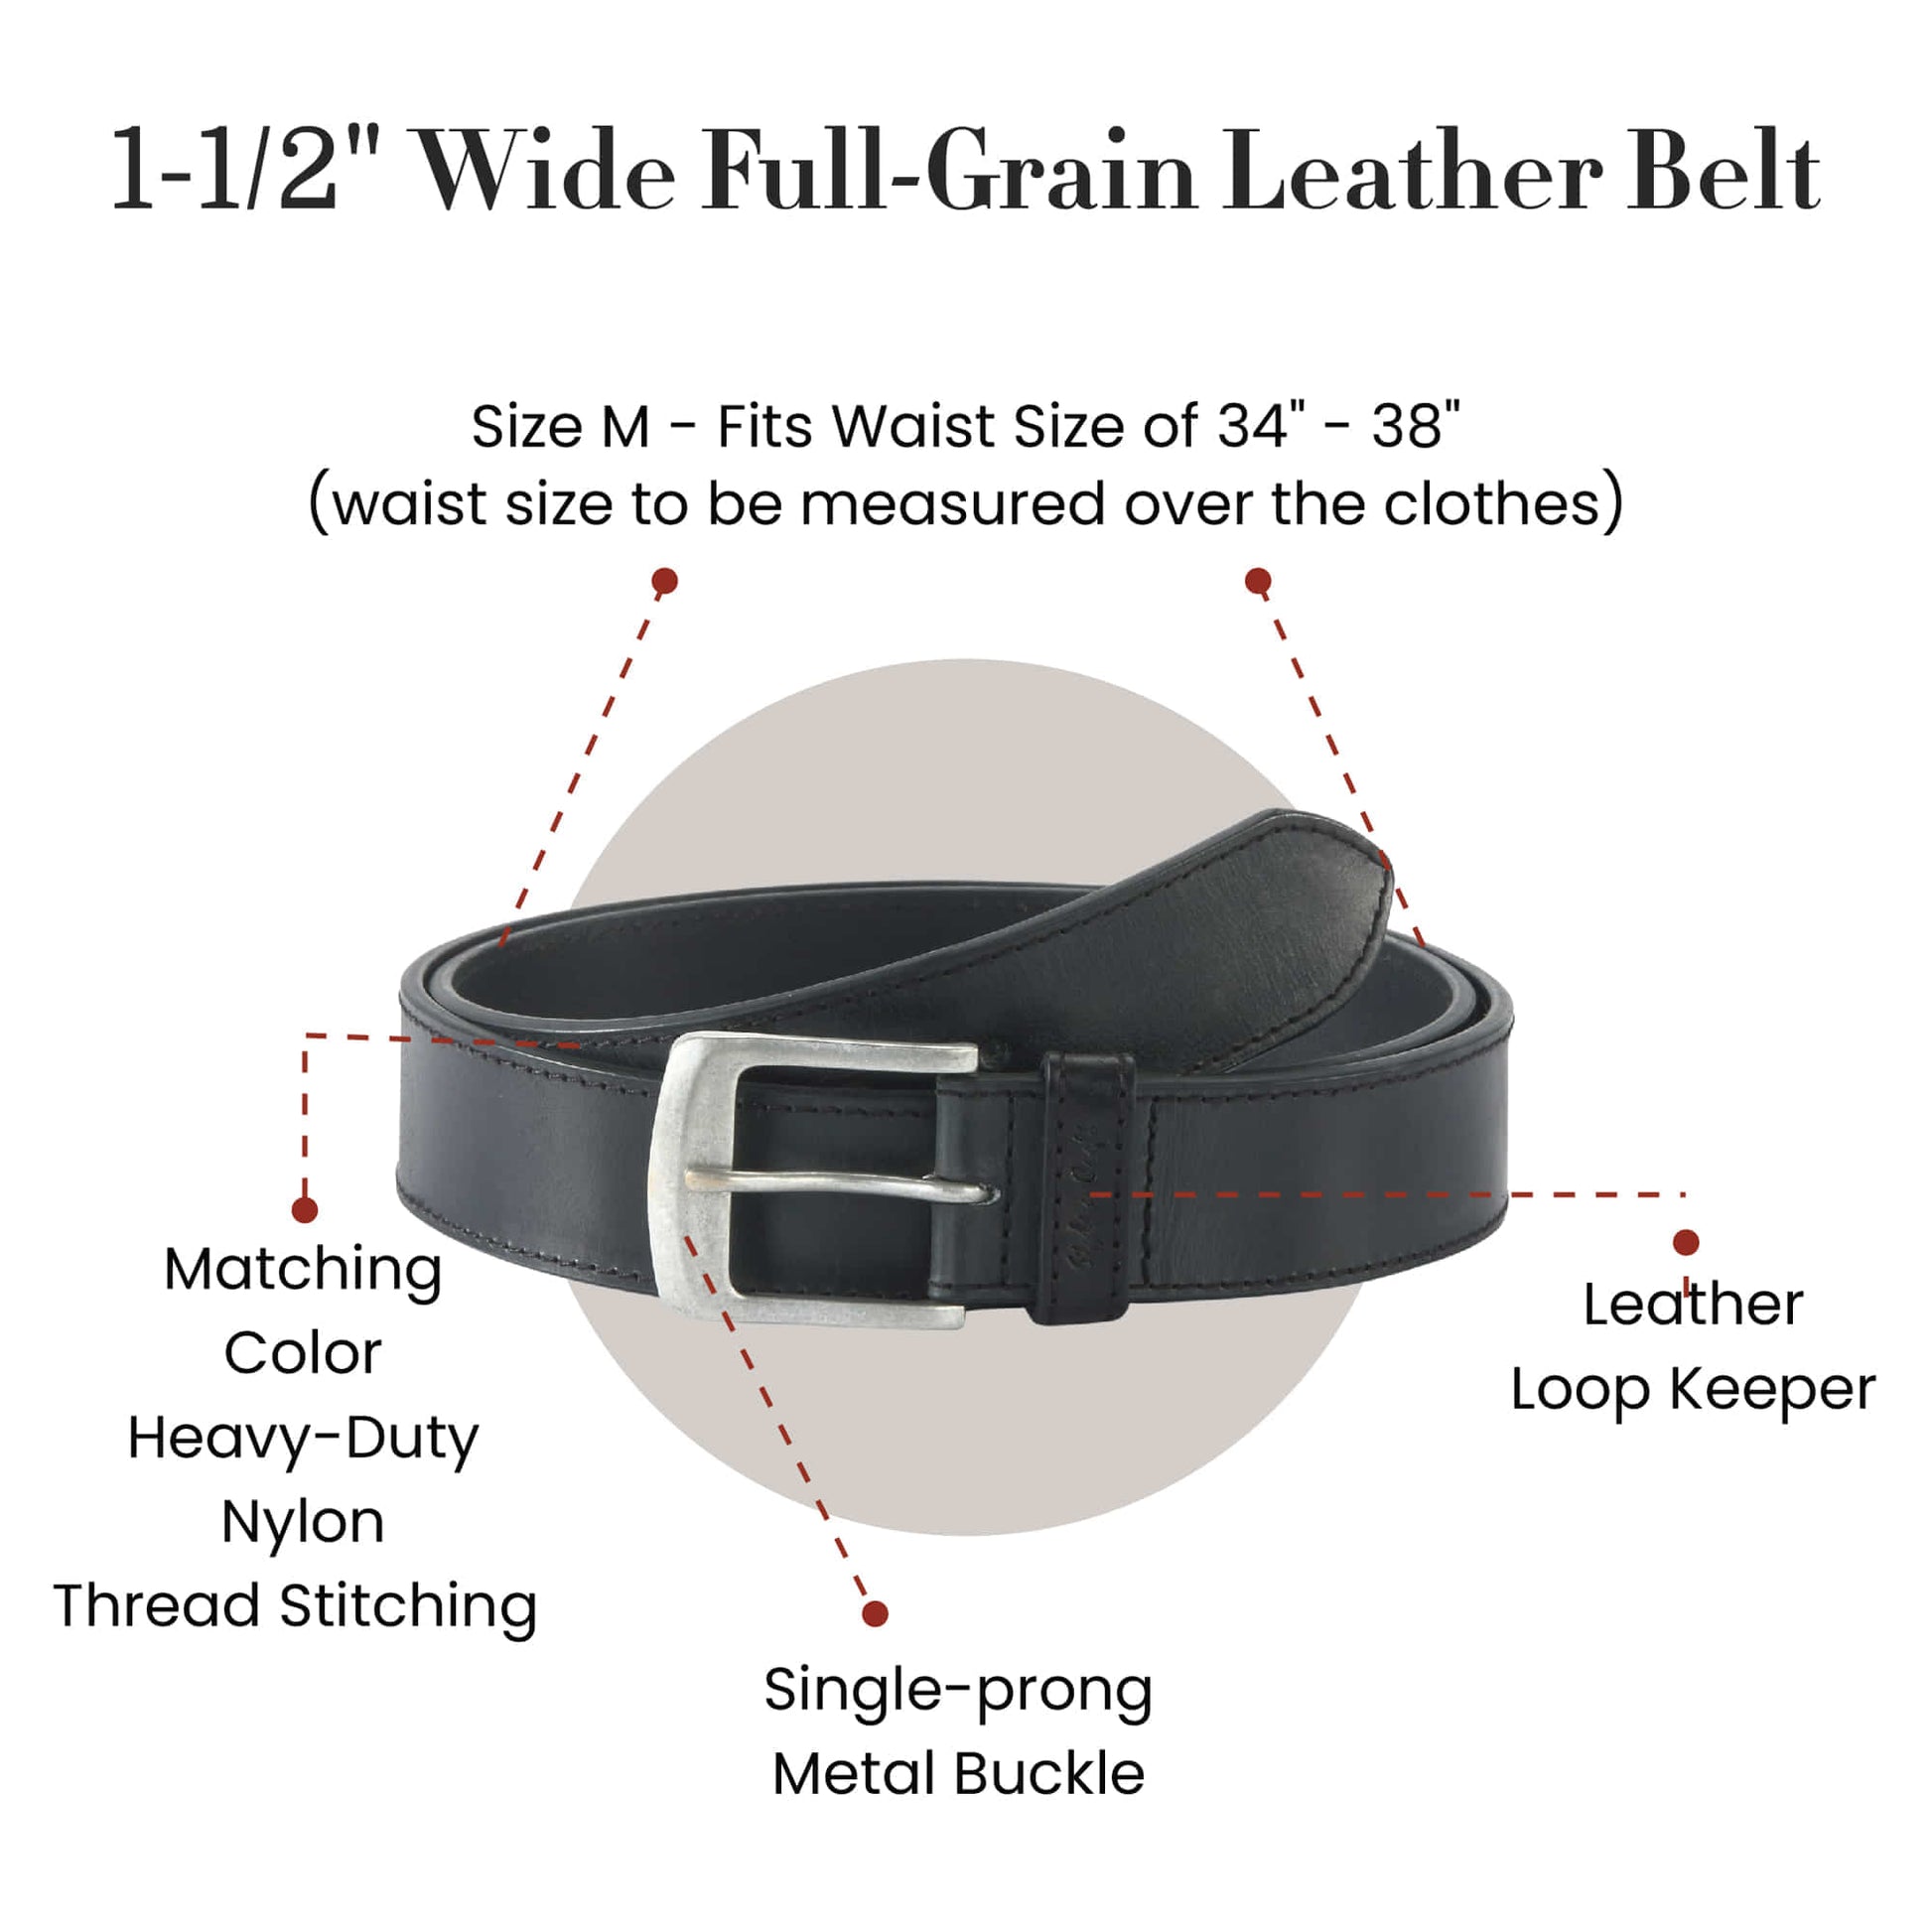 392701-M - one and a half inch wide medium size leather belt in black color full grain leather - front view showing the details